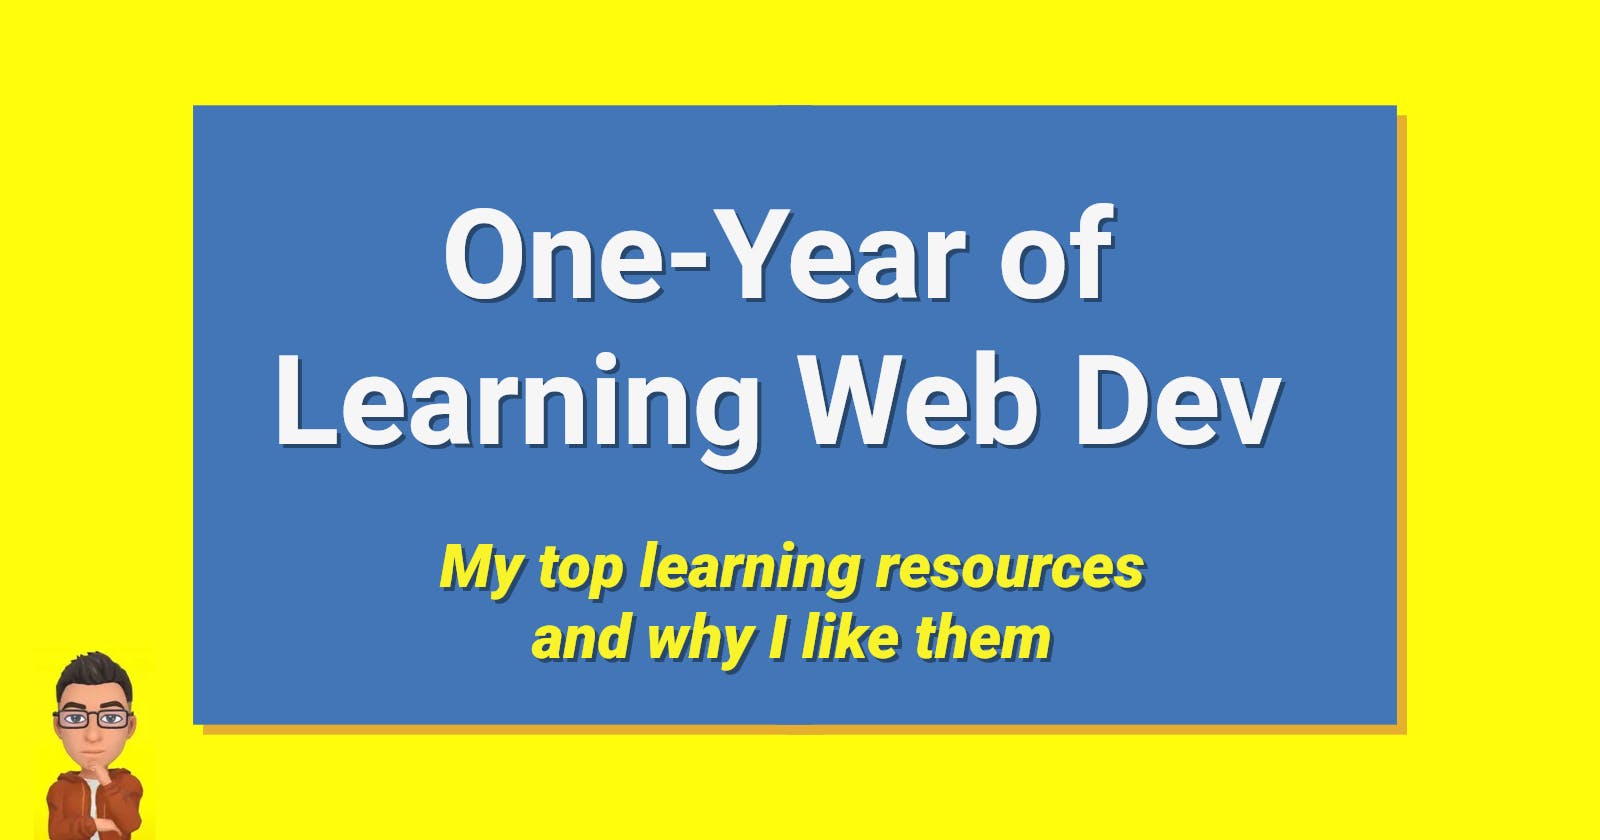 One-Year of Learning Frontend Web Development